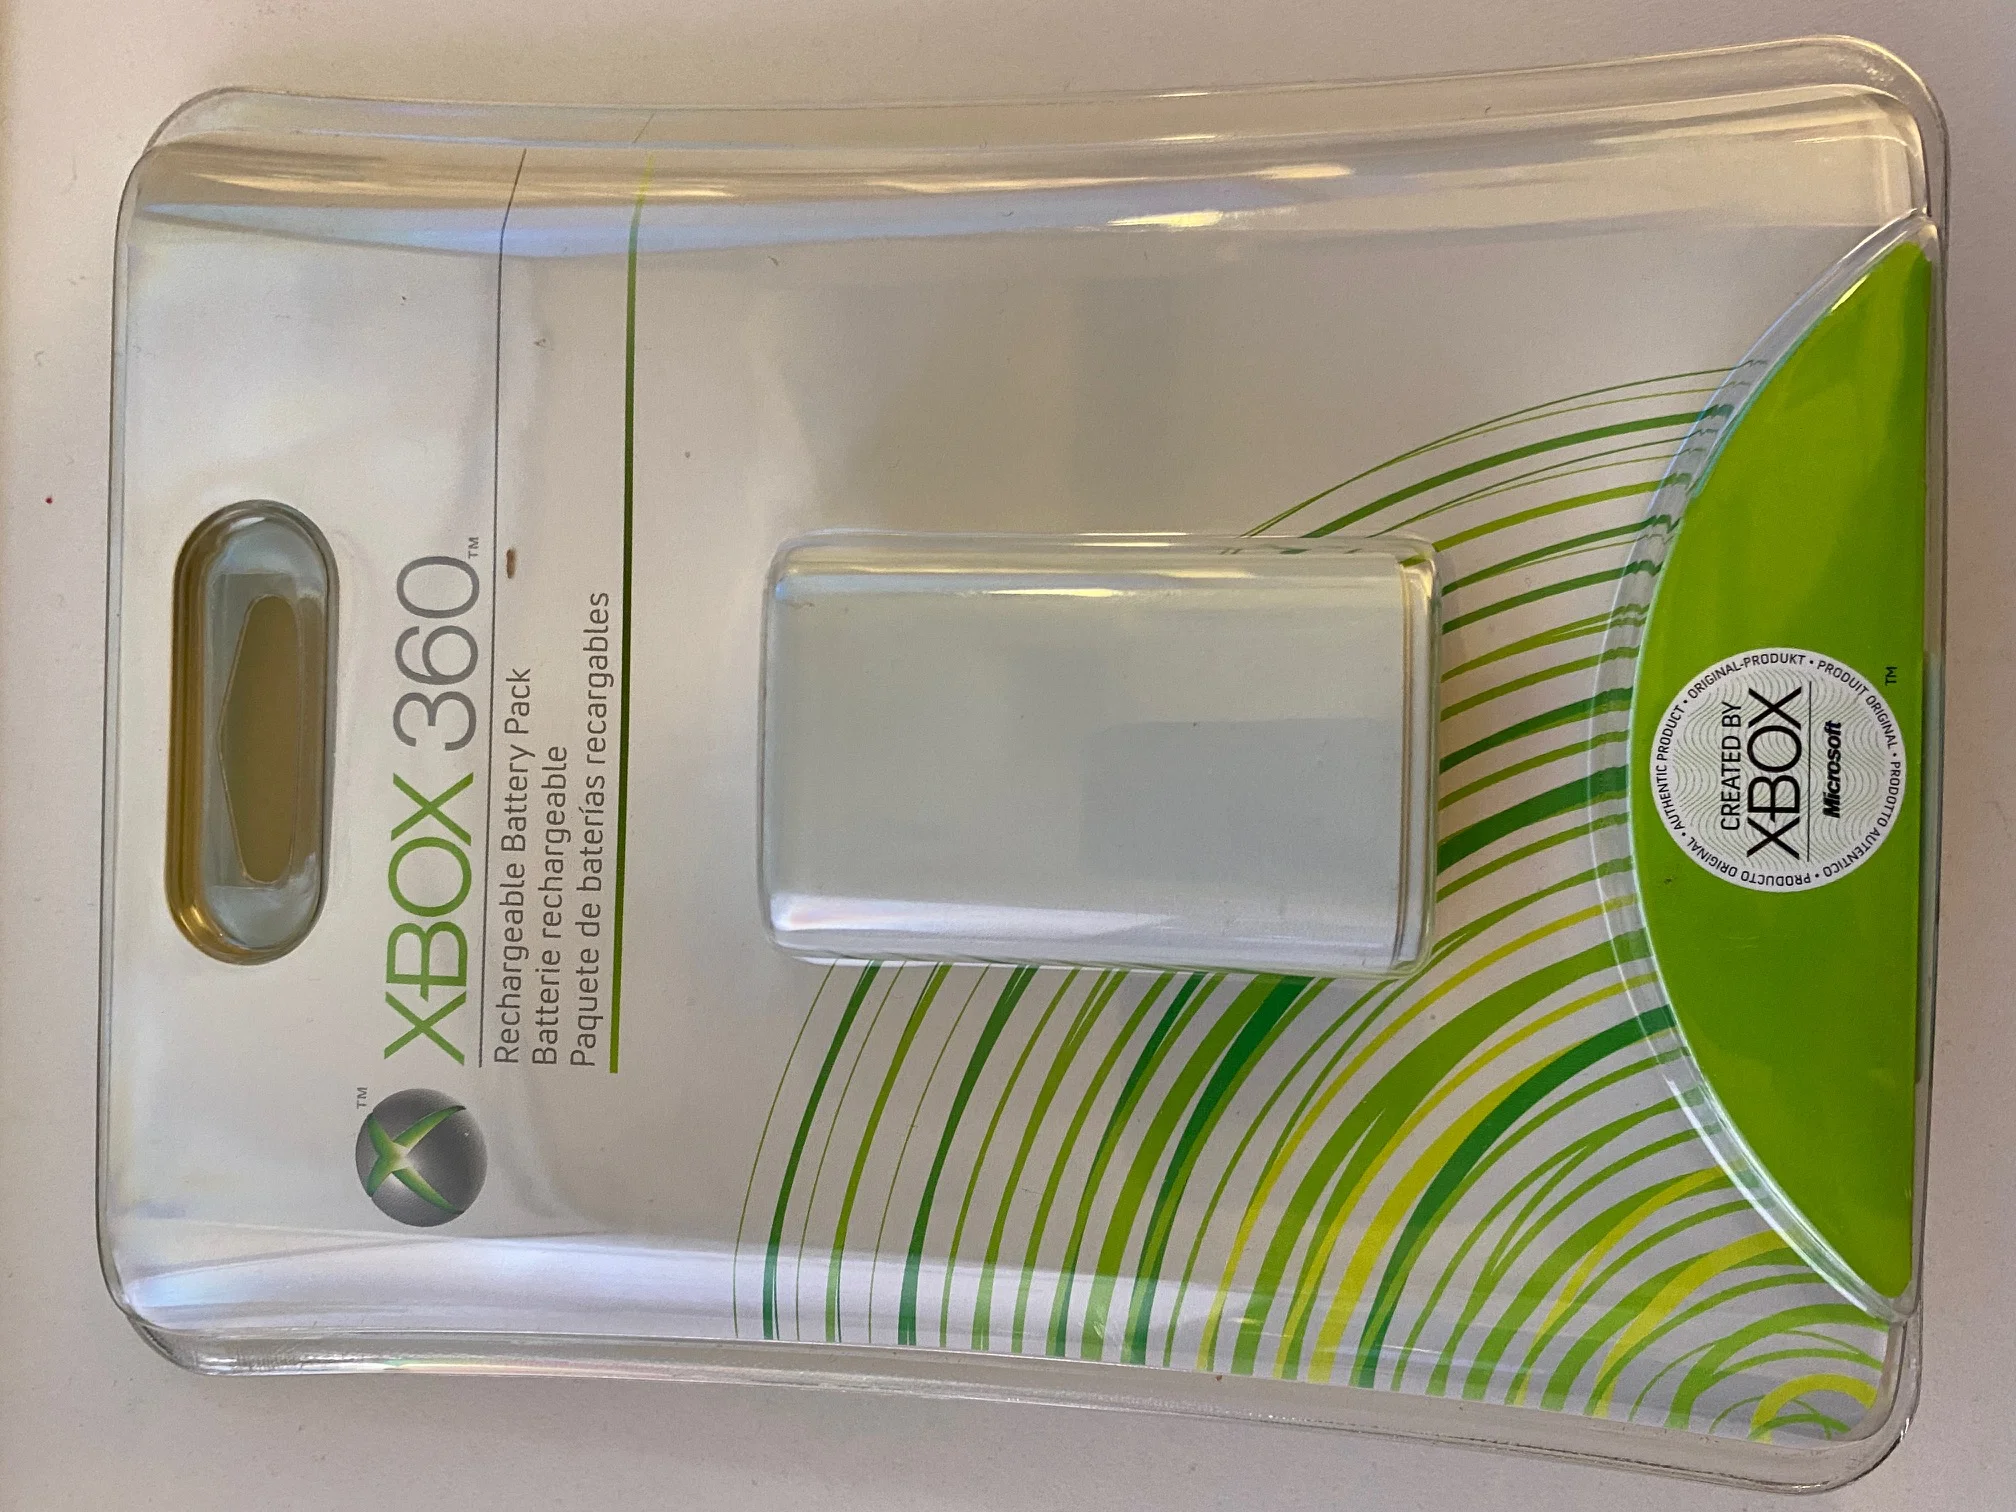  Microsoft Xbox 360 Rechargeable Battery Pack